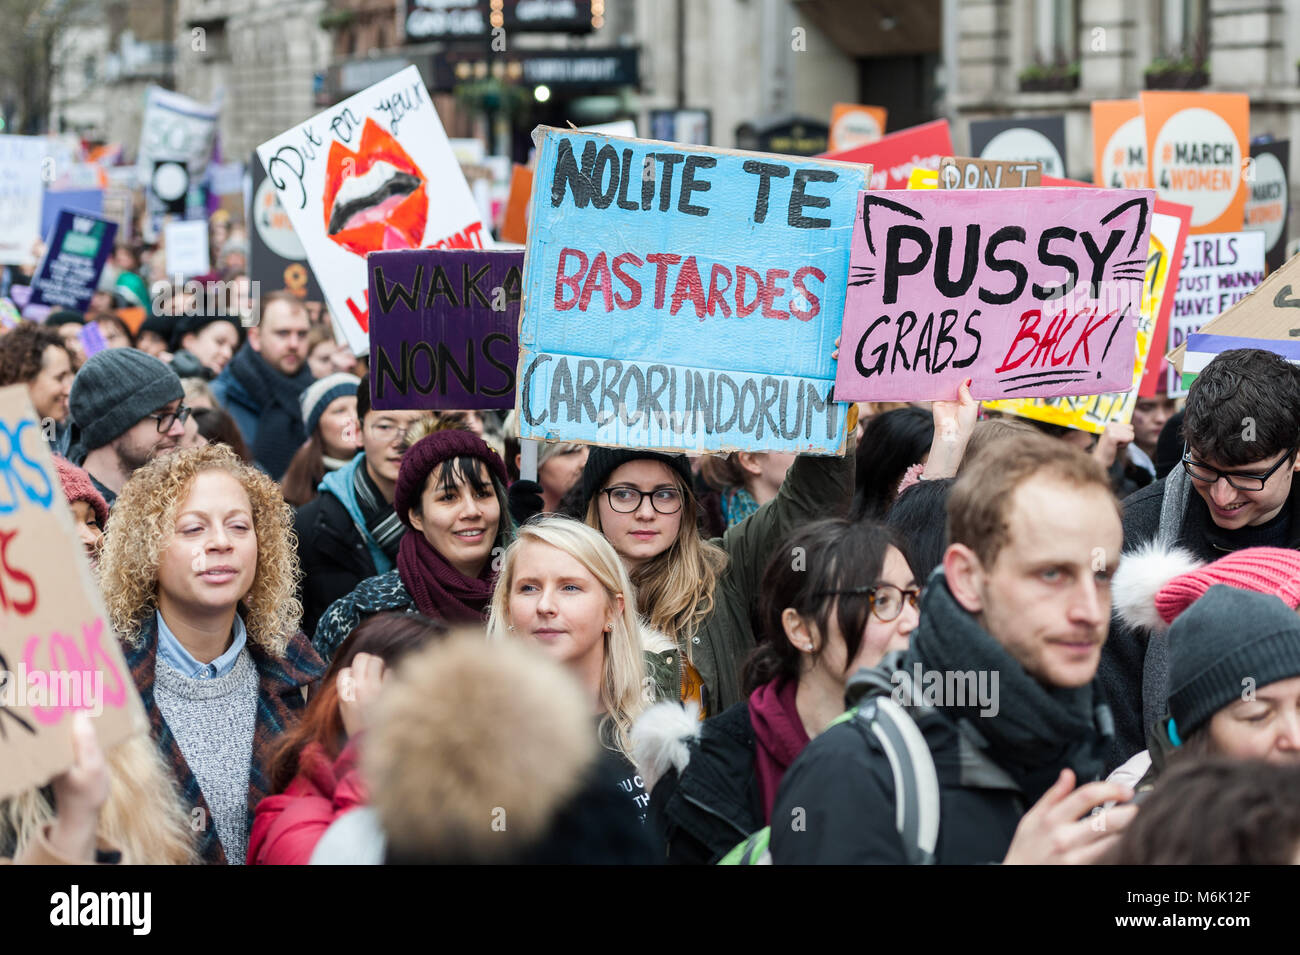 London, UK. 4th March, 2018. Thousands of people including politicians, celebrities and activists marched from the Houses of Parliament to a rally in Trafalgar Square in London during annual March4Women to mark International Women's Day and 100 years since women in the UK first gained the right to vote. The event, organised by CARE International, aims to highlight inequality faced by women and girls around the world and campaign for gender equality and women's rights worldwide. Credit: Wiktor Szymanowicz/Alamy Live News Stock Photo